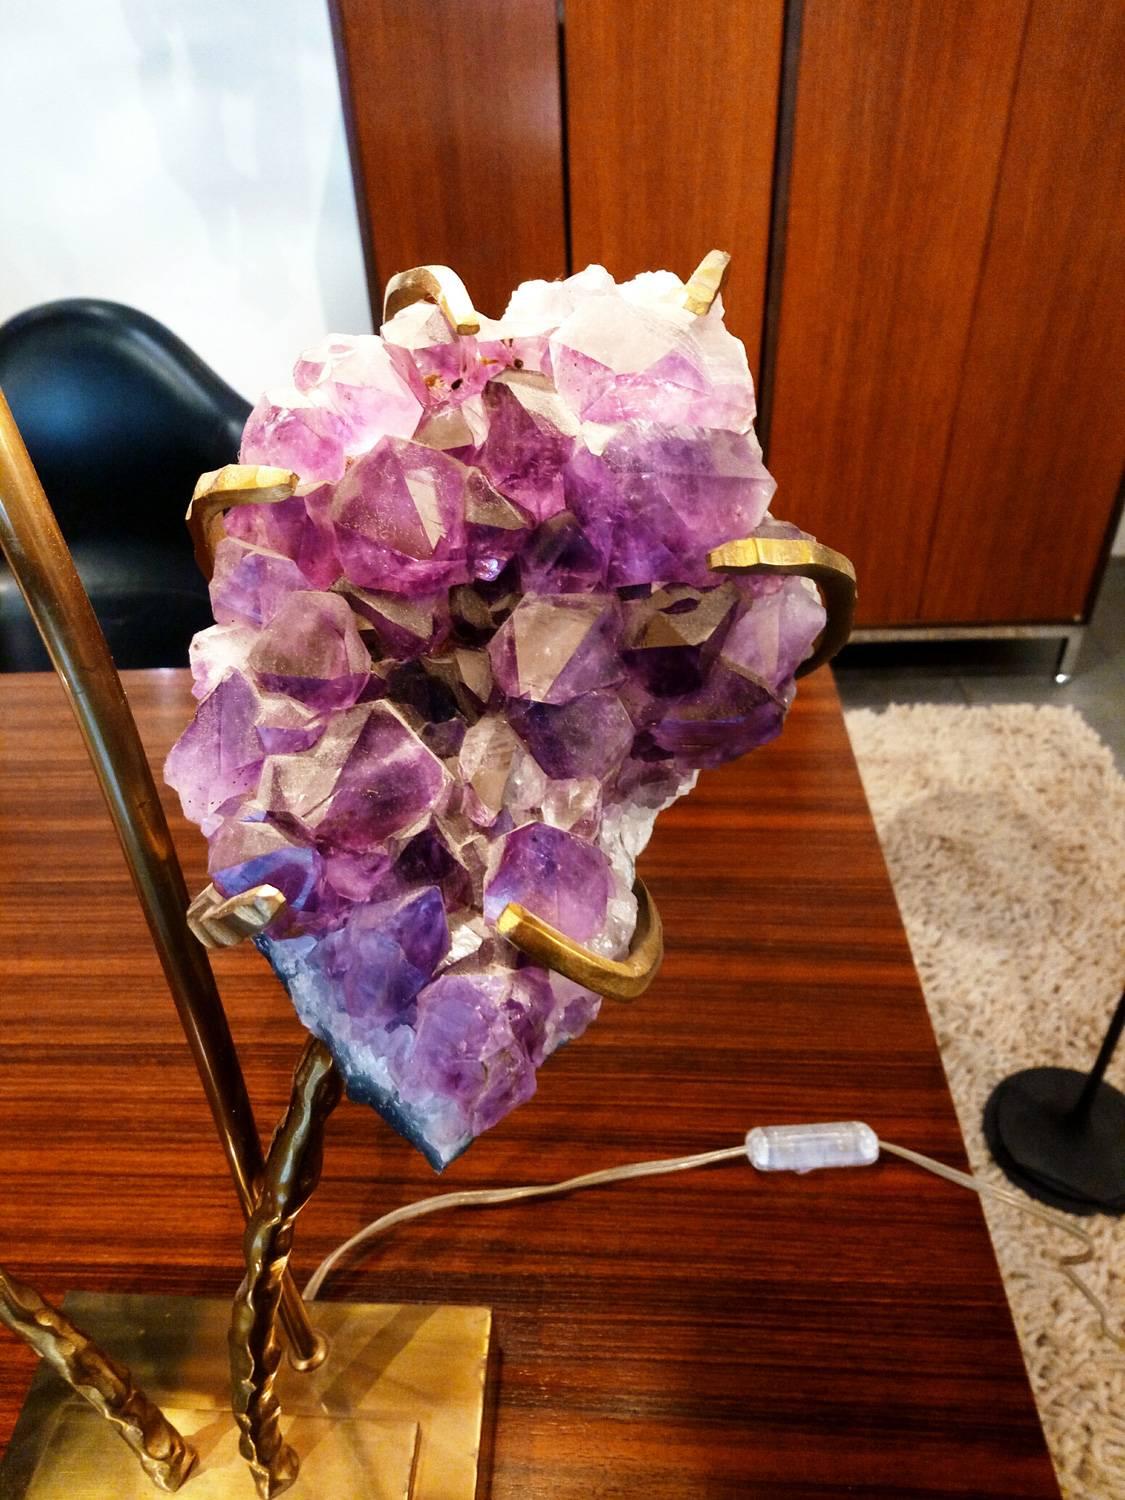 Elegant lamp by Willy Daro (XX Italy),
circa 1960.
Polished gilt bronze.
Amethyst and rock crystal,
signed on the base.
Measures: 81 x 40 cm.